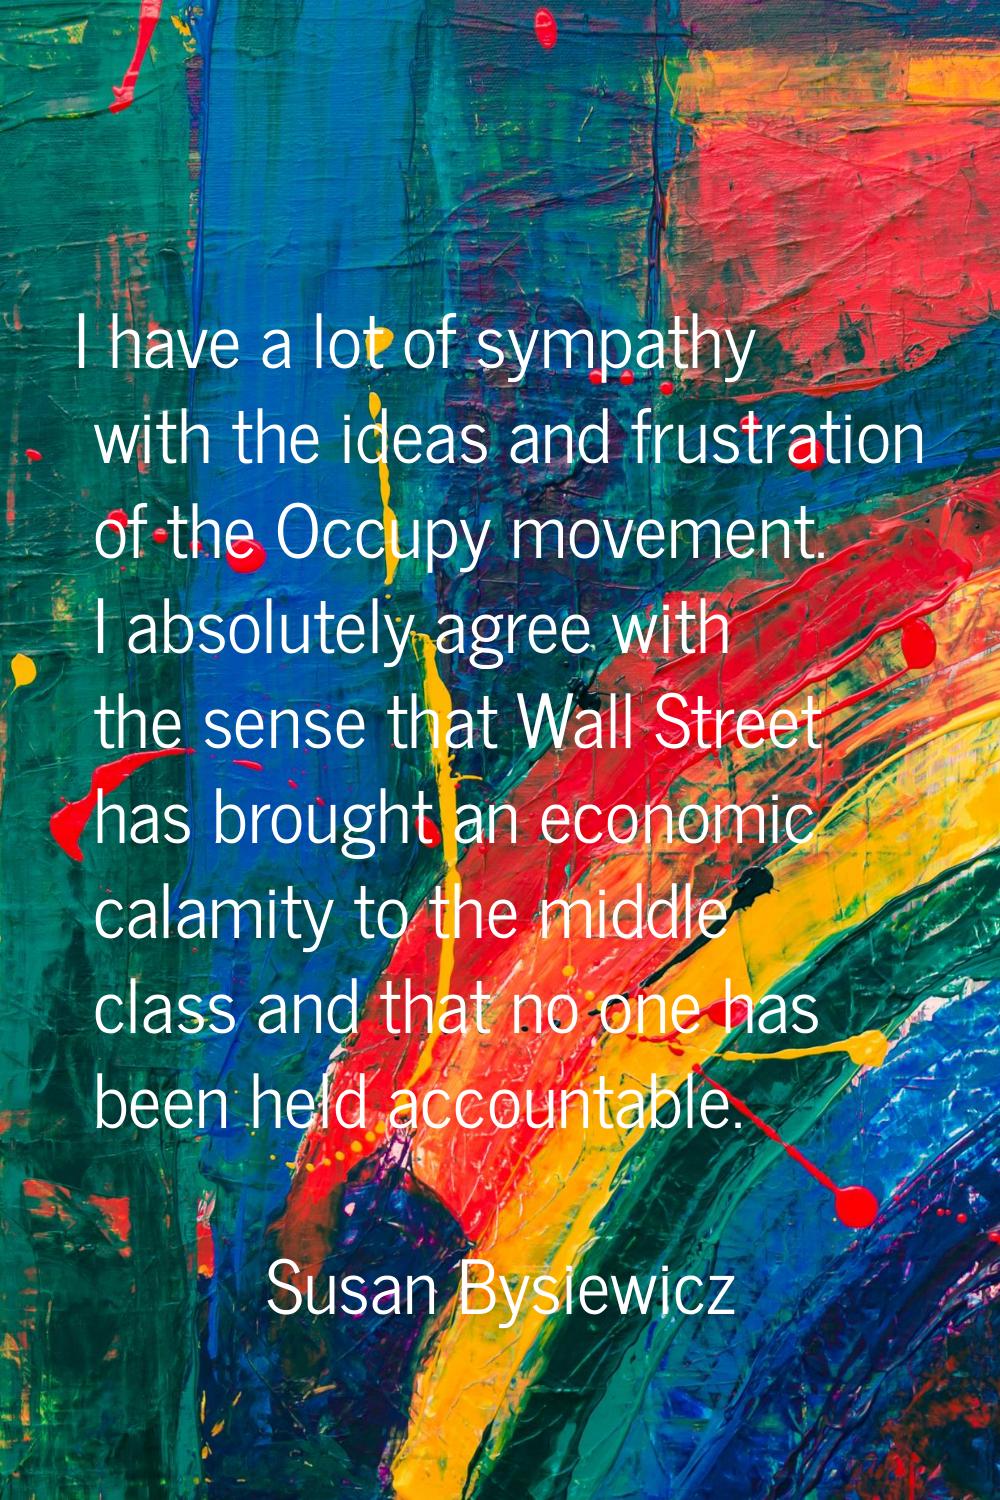 I have a lot of sympathy with the ideas and frustration of the Occupy movement. I absolutely agree 